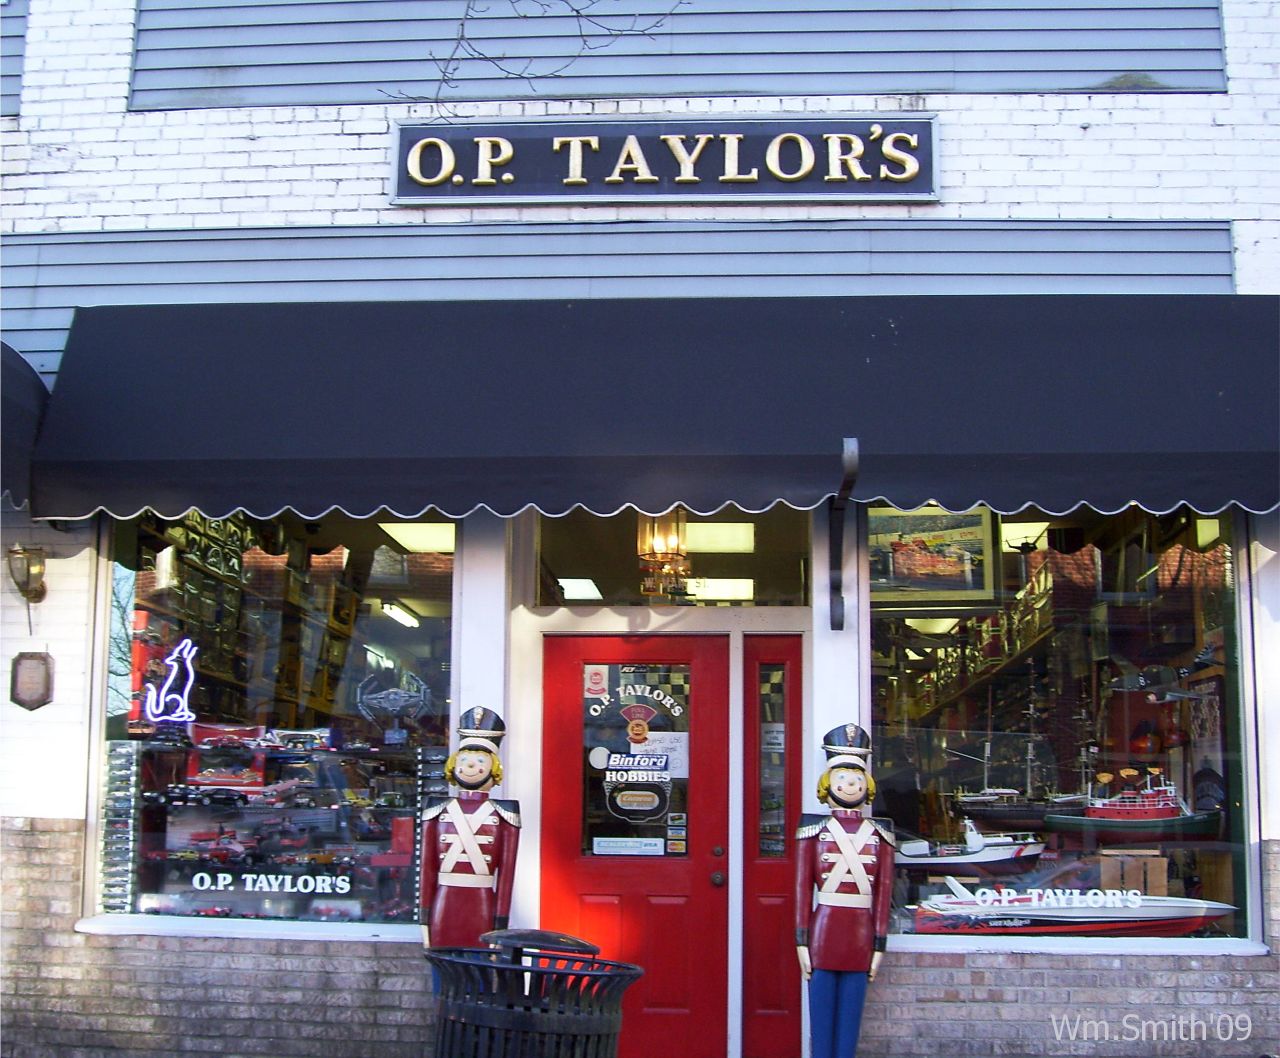 Two smiling nutcracker toys guarding the entrance of O.P. Taylor’s, one of the best toy stores in America, while the inside of the store visible through its window